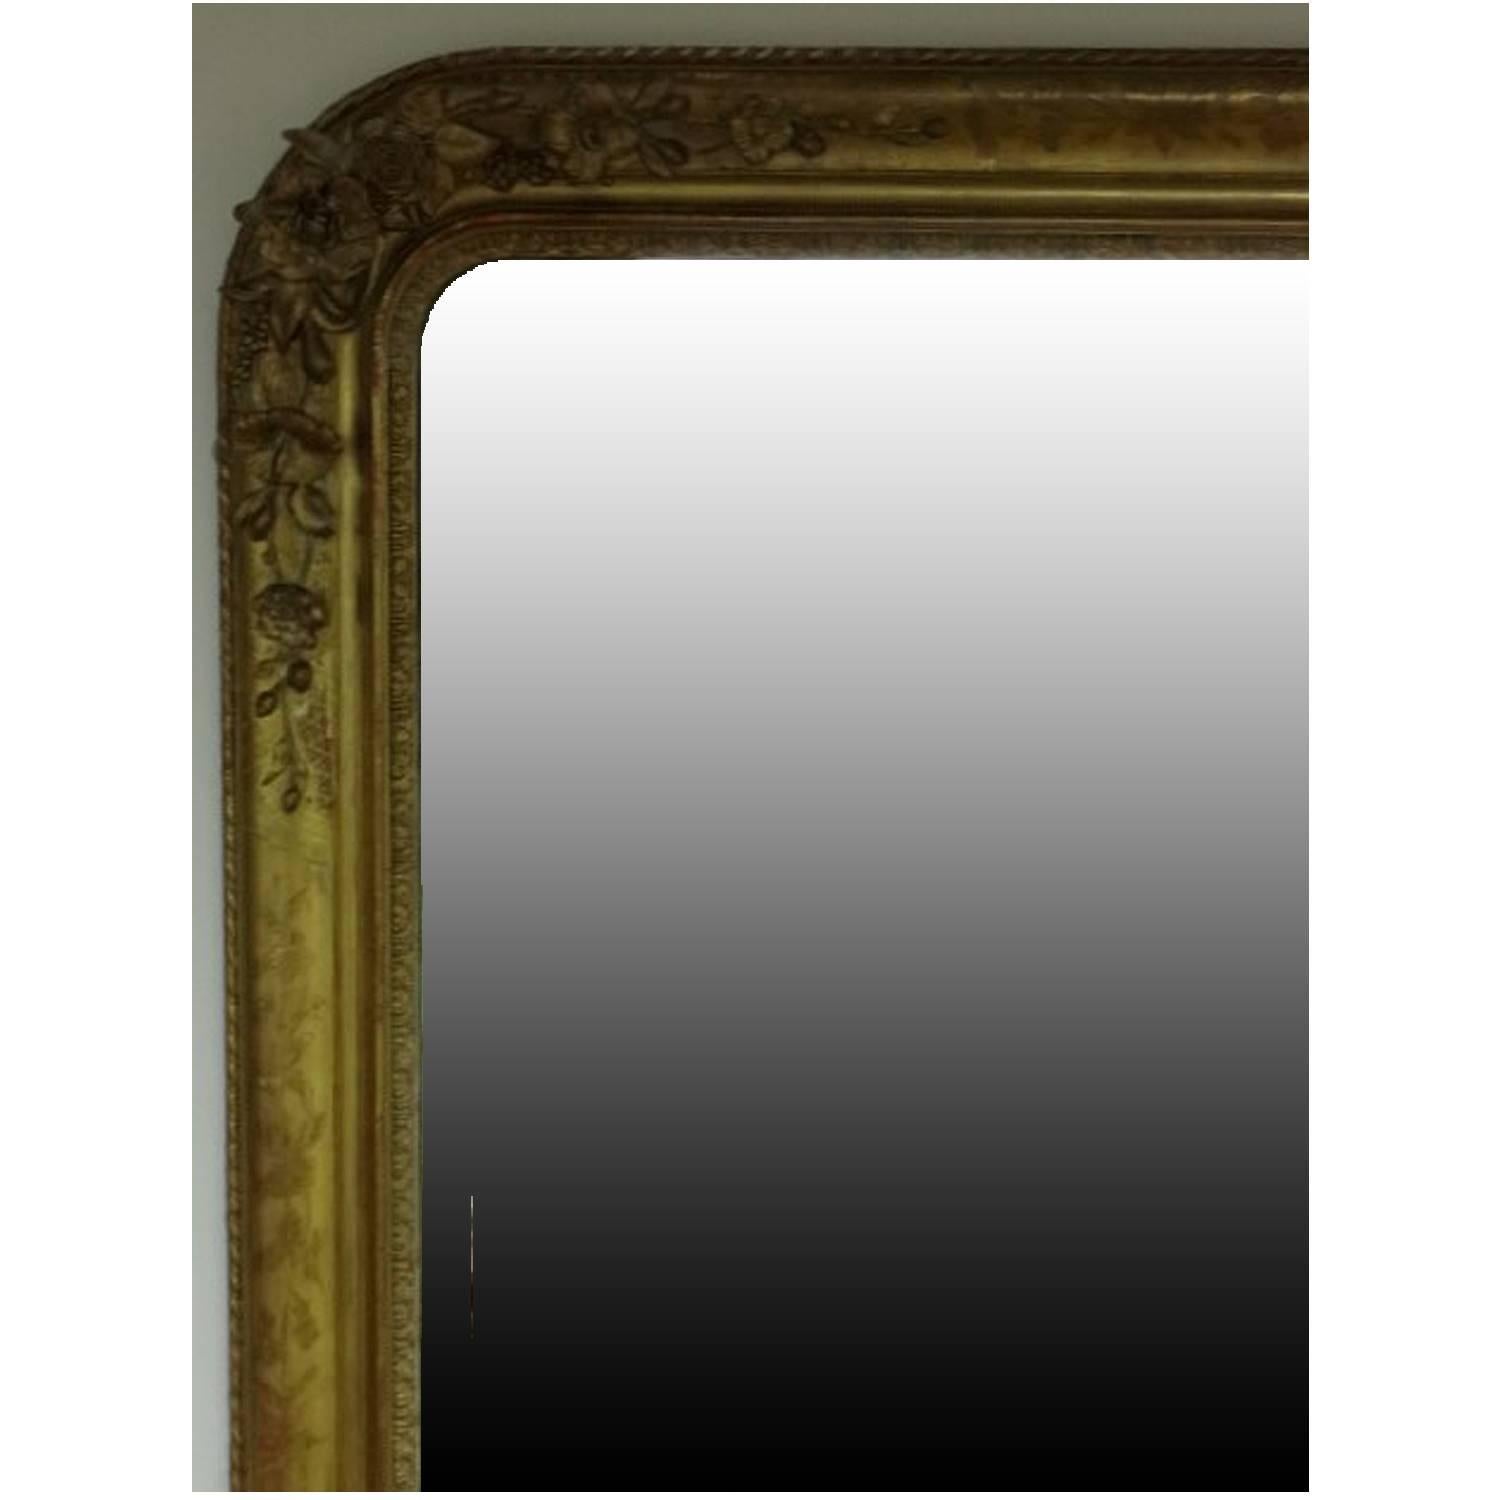 A stunning French gesso mirror with original plate glass, in excellent original condition.